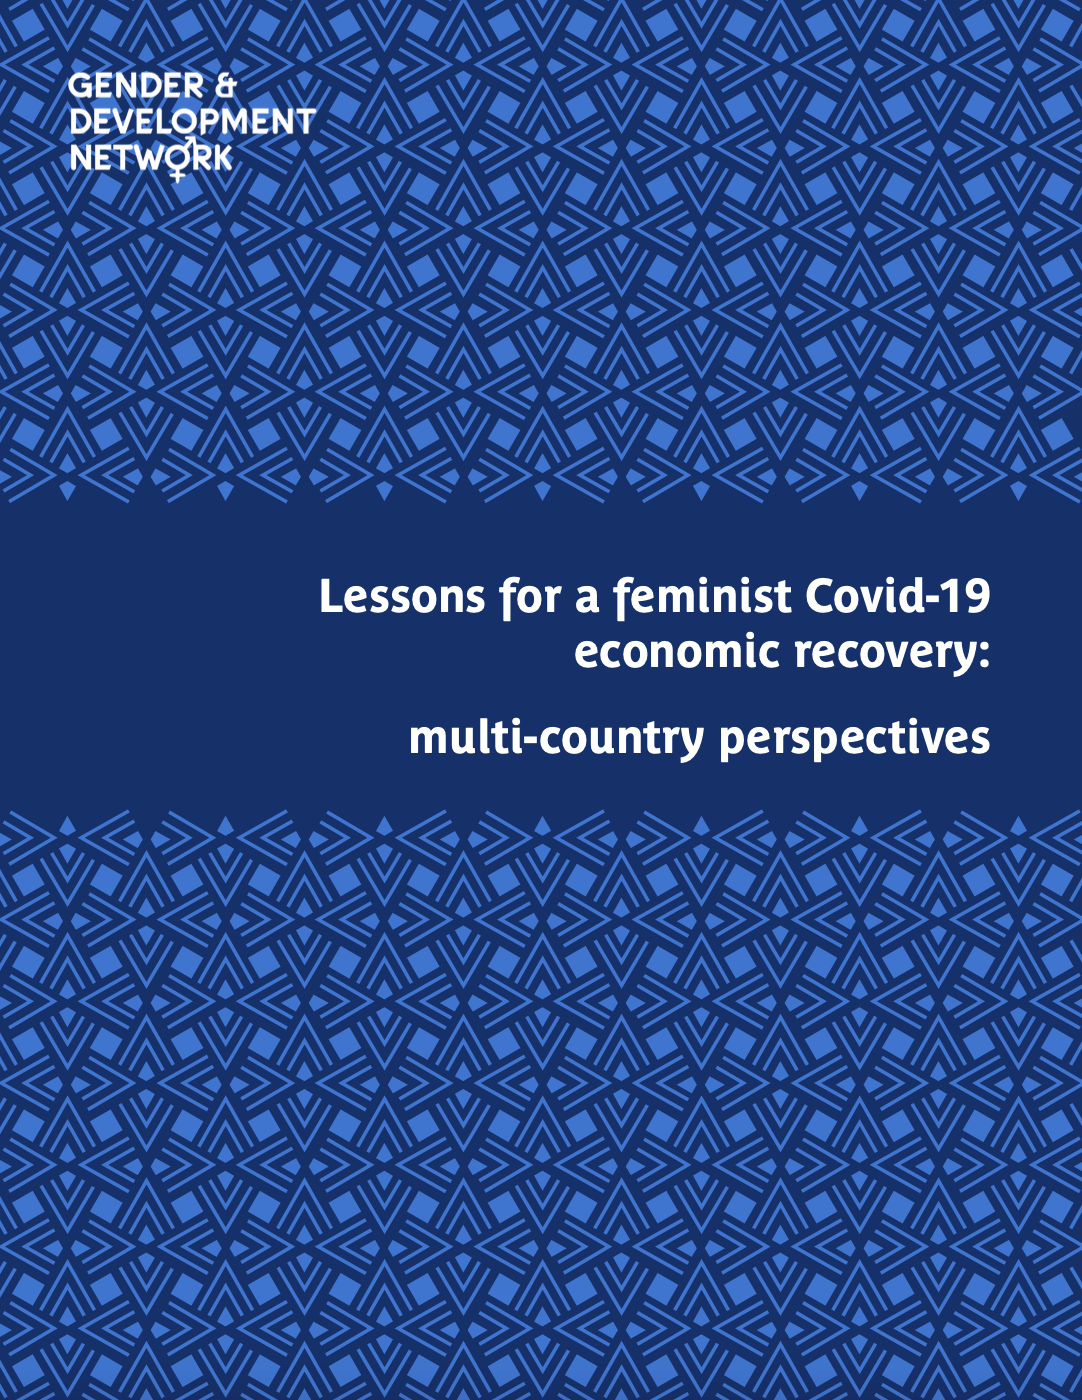 Lessons for a feminist Covid-19 economic recovery: Multi-country perspectives